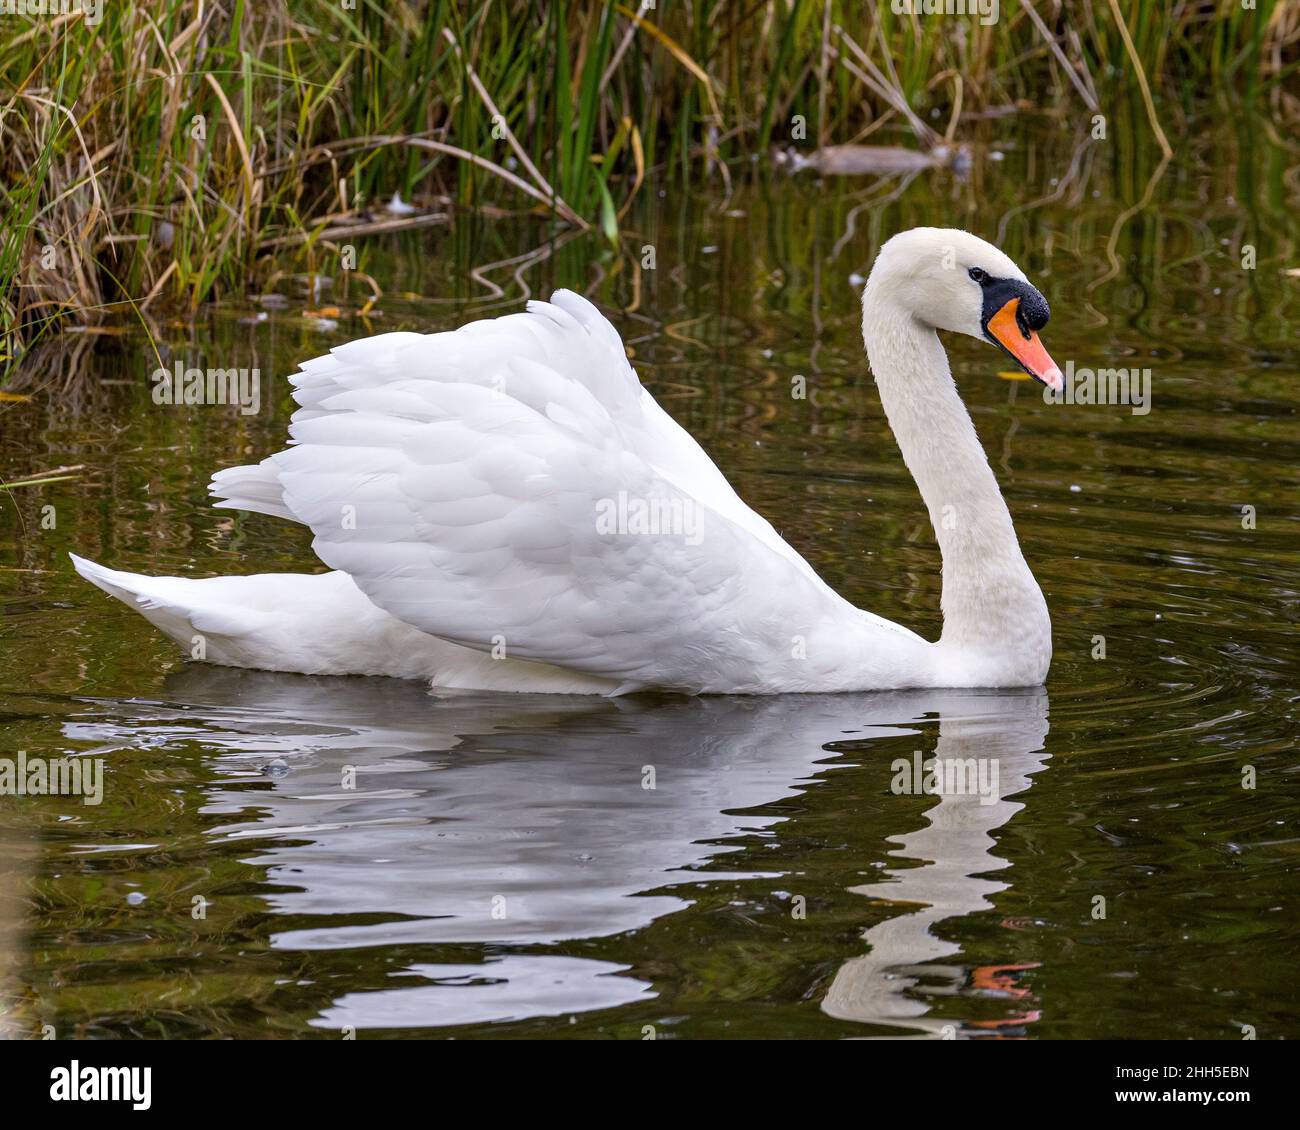 Swan Mute bird swimming with spread white wings with water background in its environment and habitat surrounding. Portrait. Picture. Image. Photo. Stock Photo